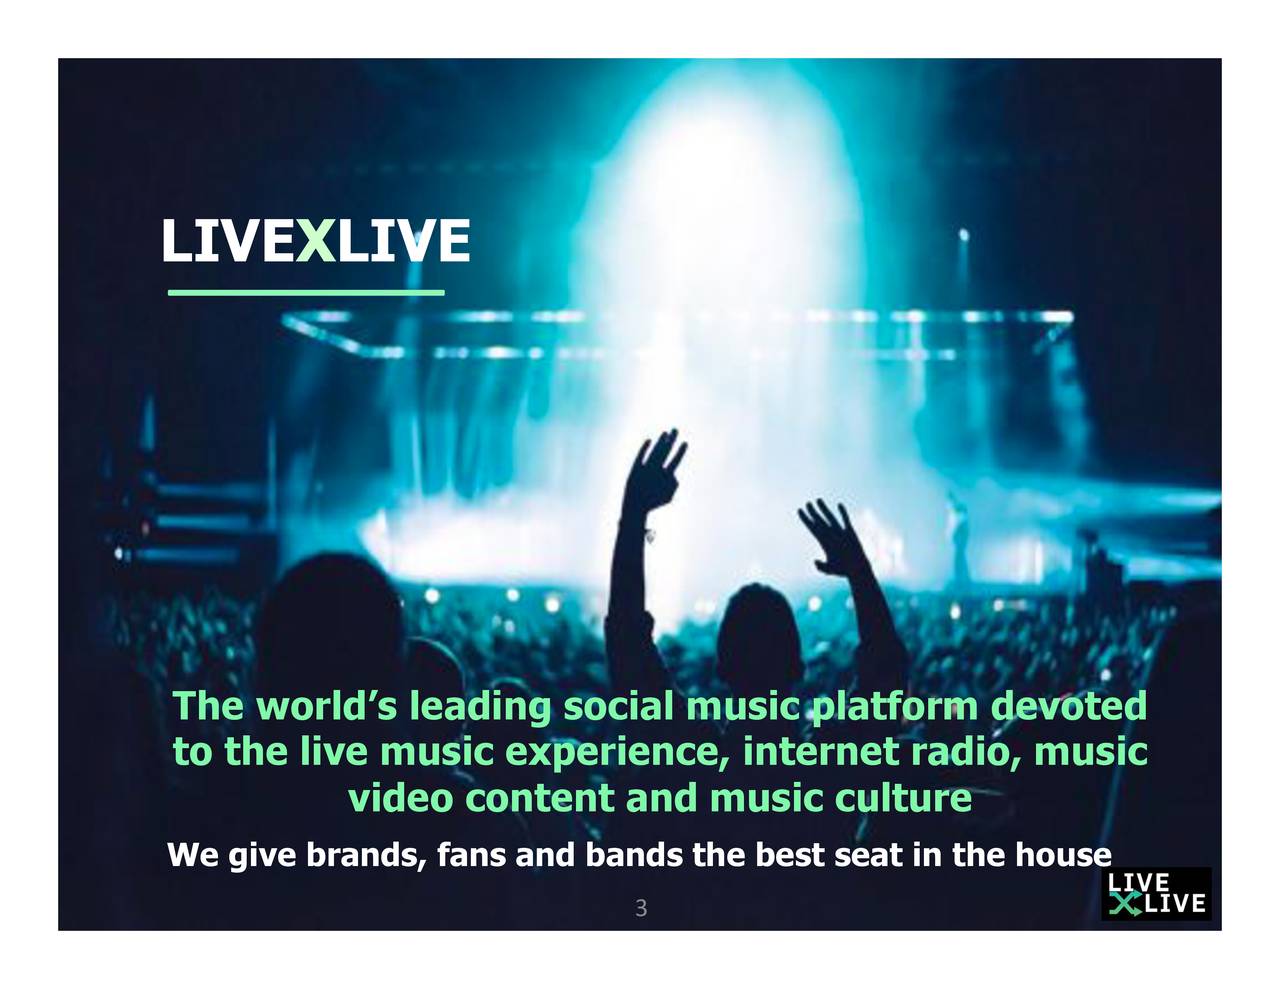 livexlive $19.99 a year